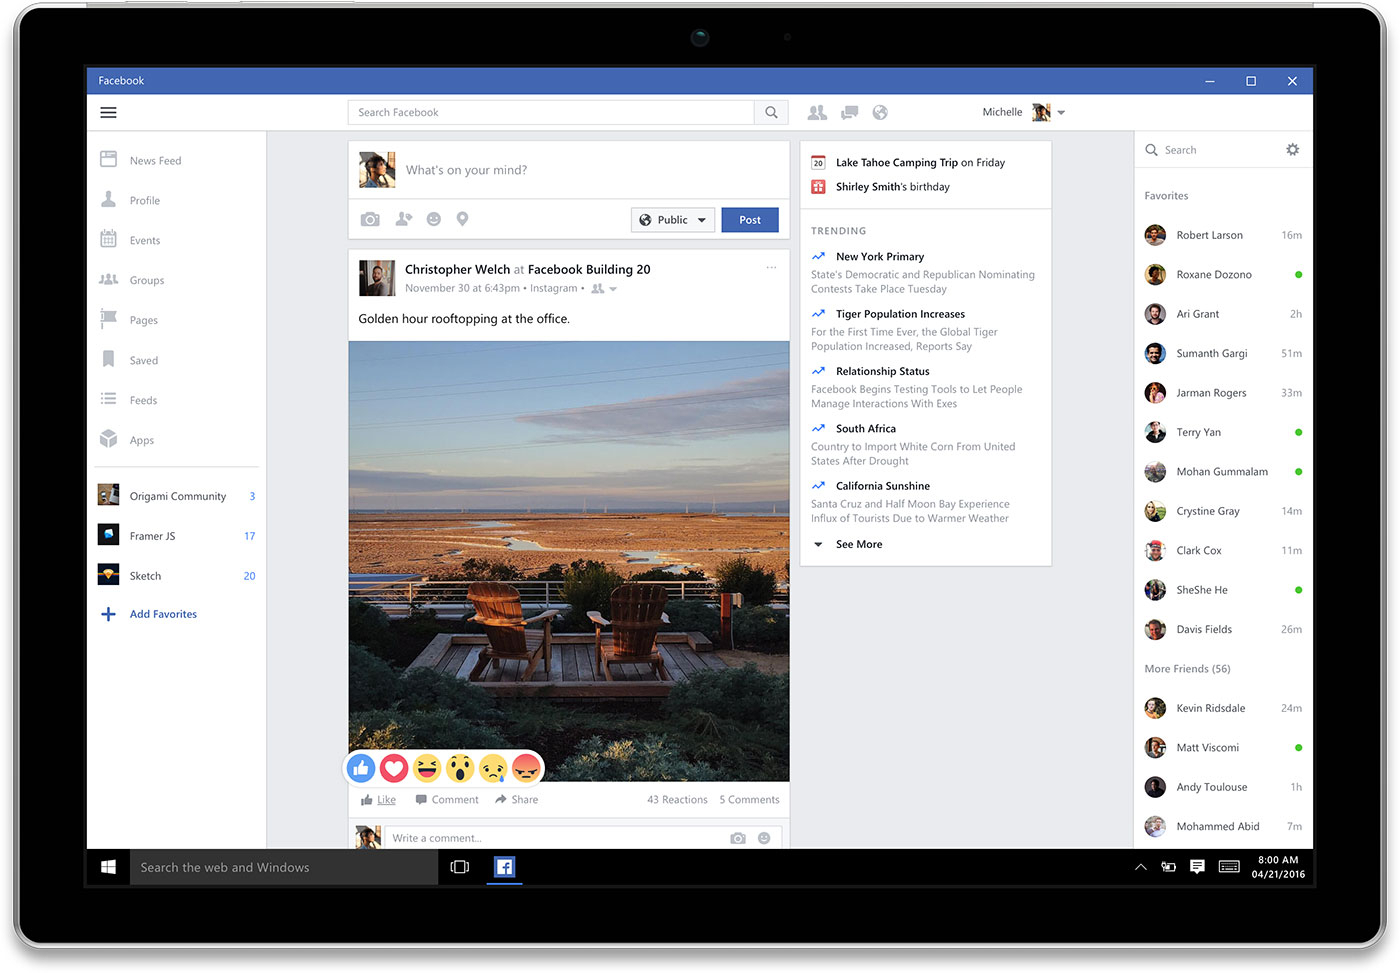 Facebook Messenger for Windows 10 now lets you make voice and video calls